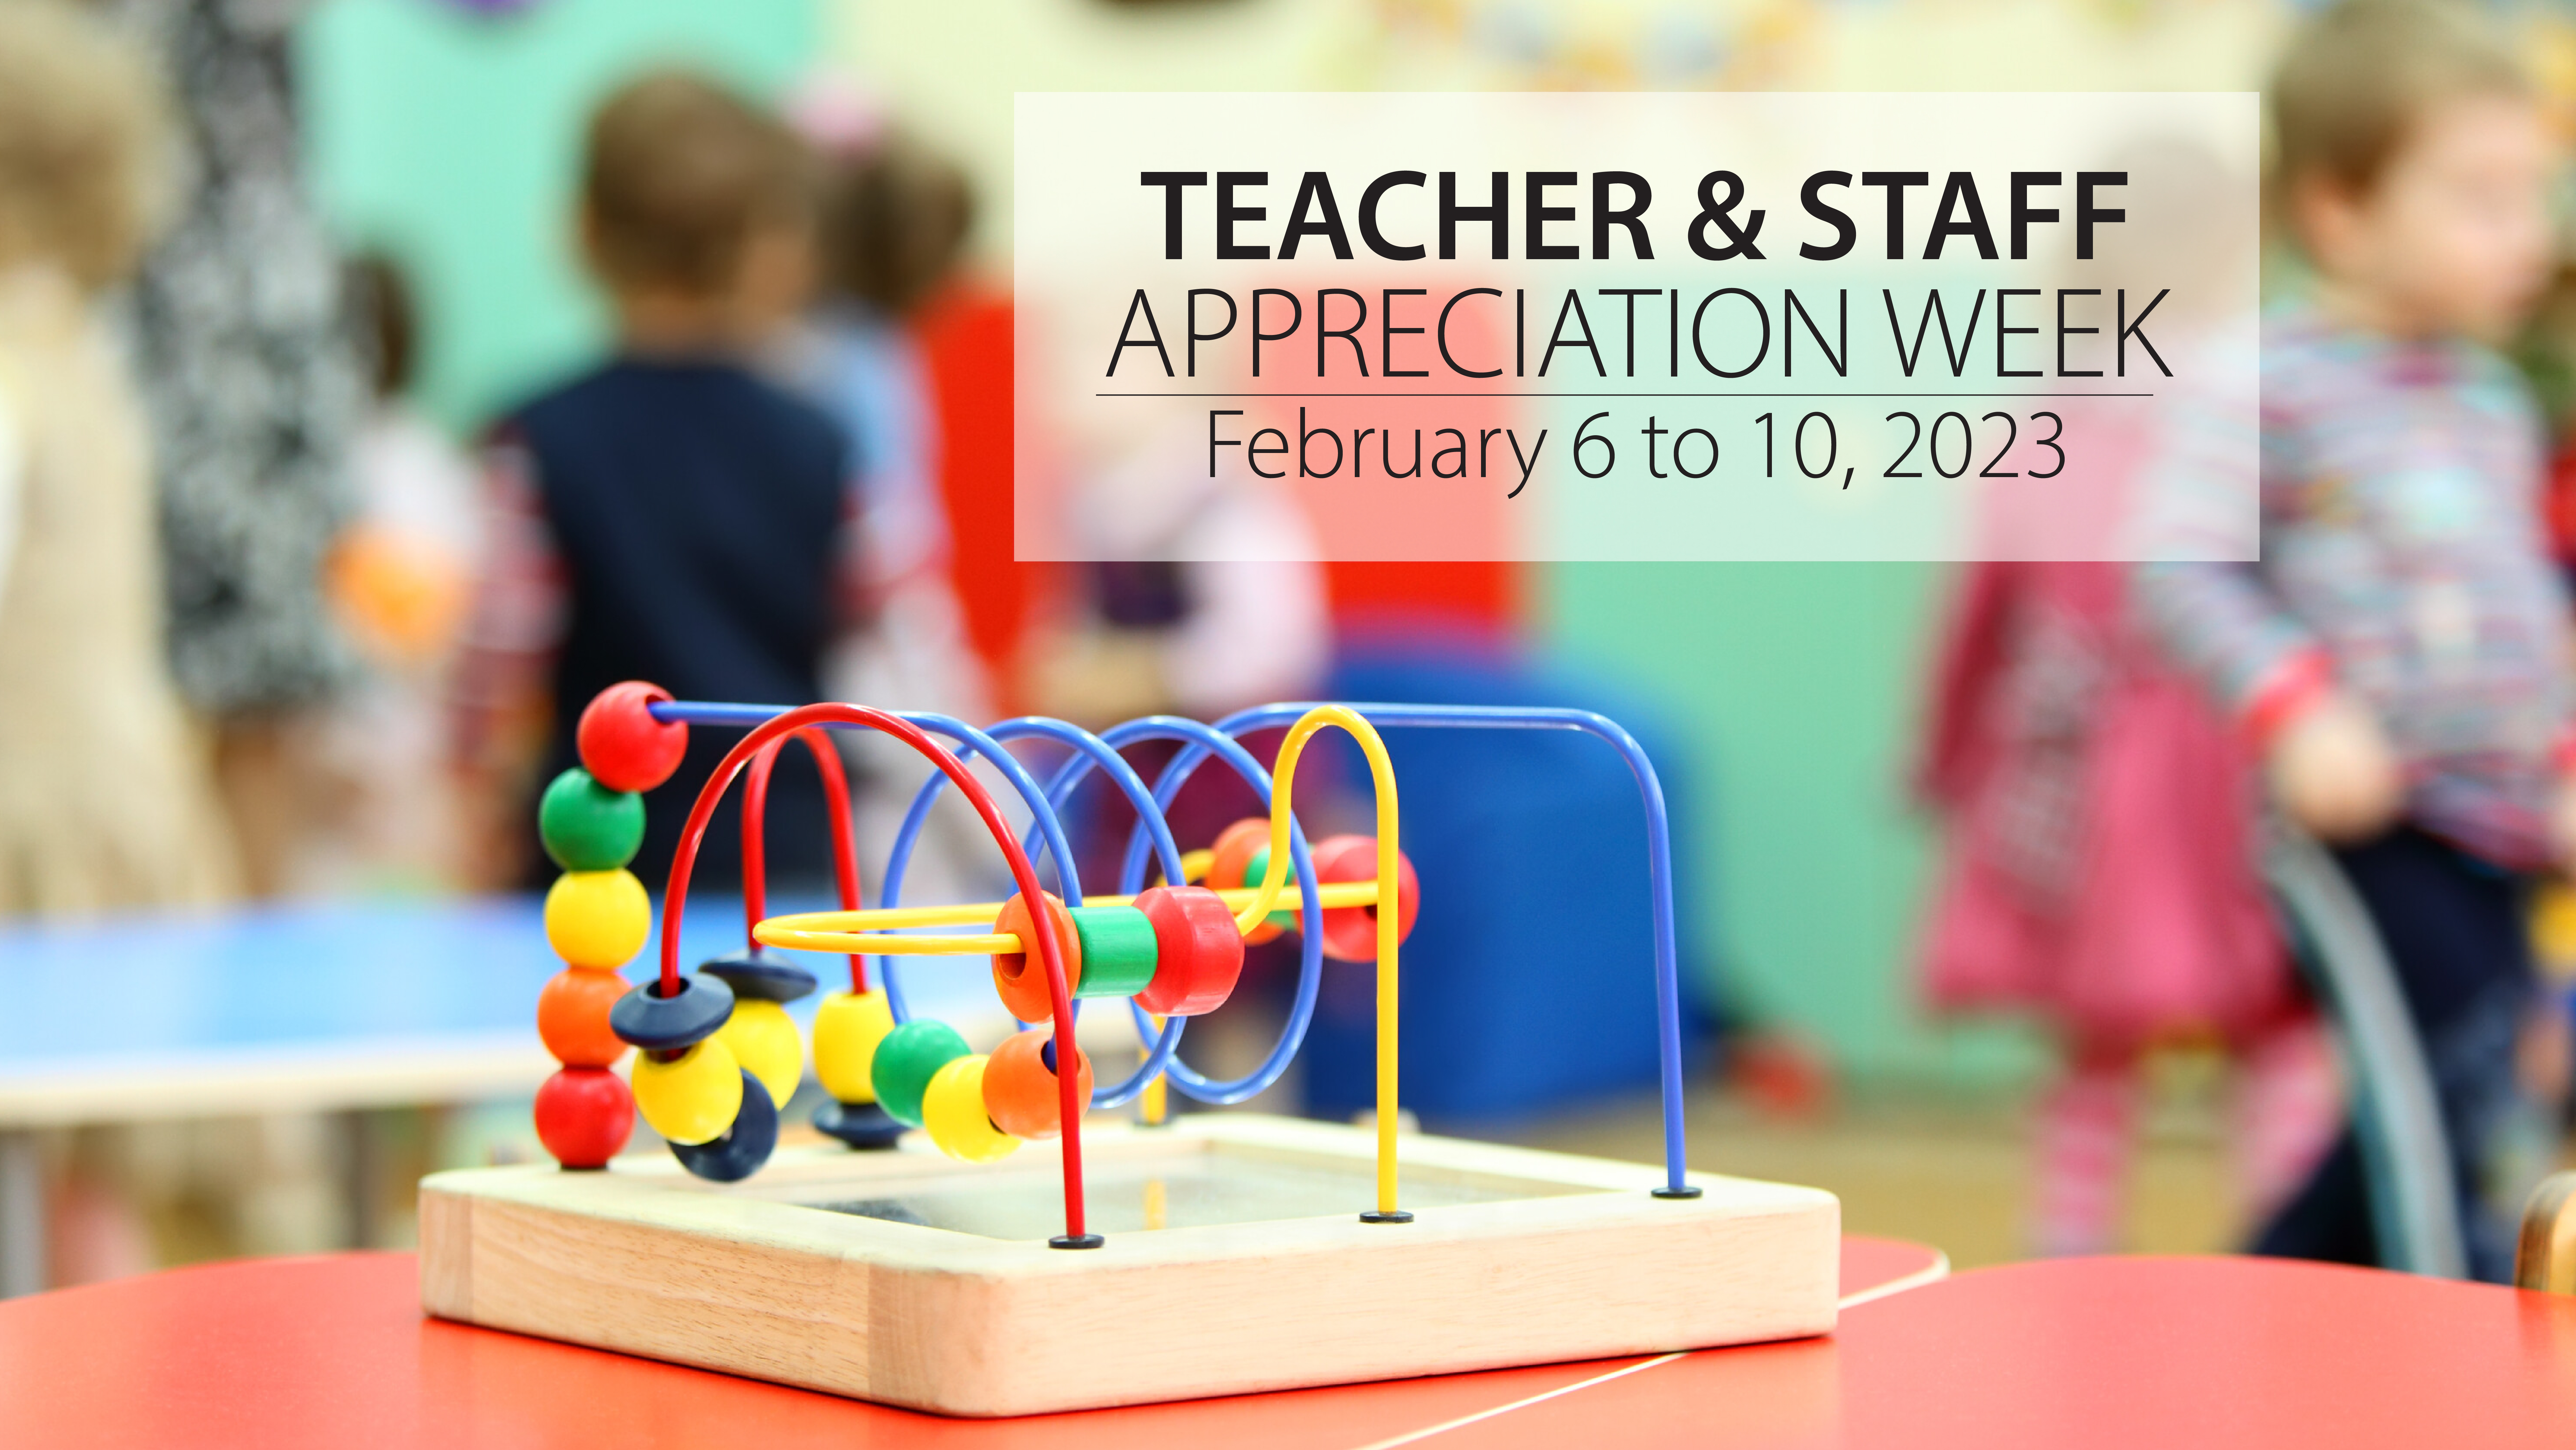 Recognizing Teachers and Staff